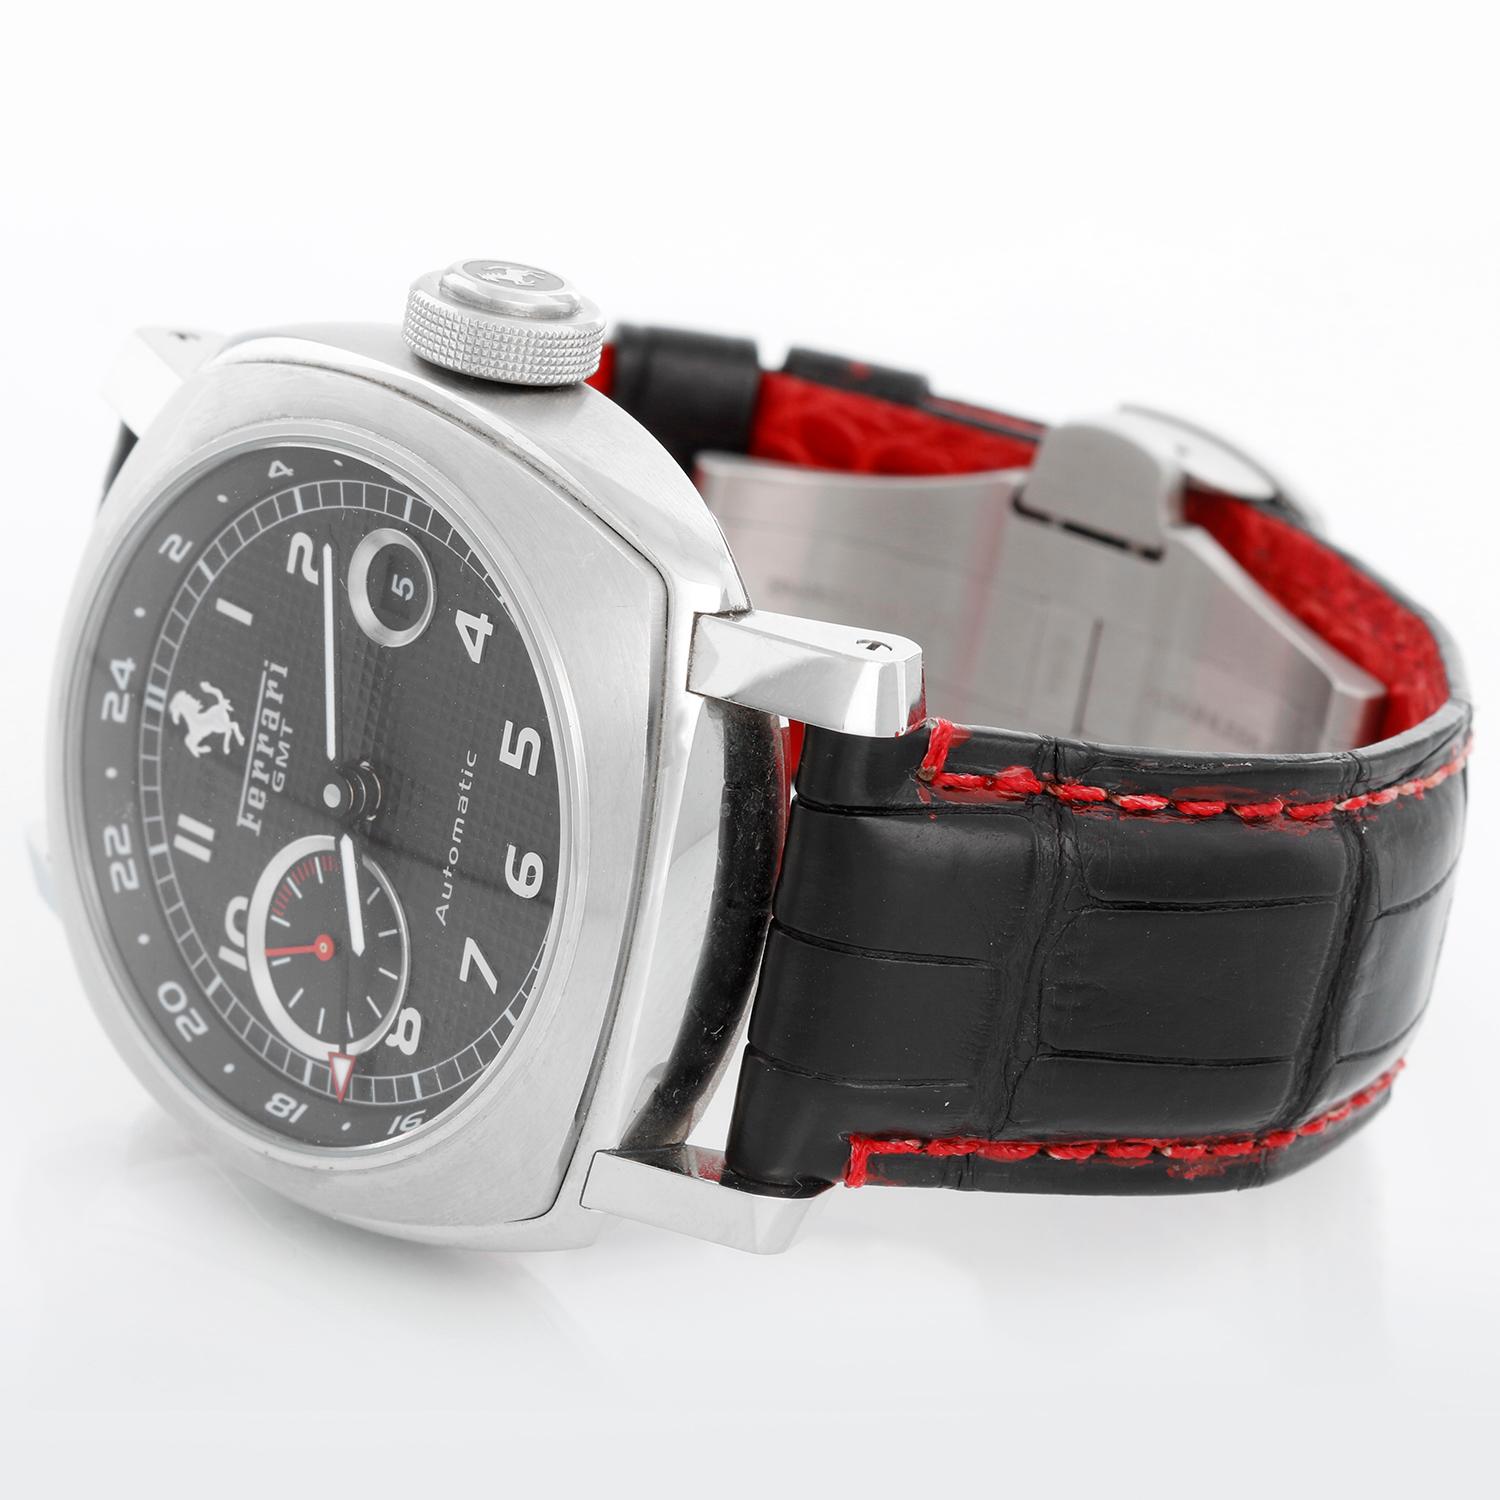 Panerai Ferrari GMT Granturismo Automatic 45MM Watch FER00003 - Automatic. Stainless steel case ( 45 mm ). Black Honeycomb dial with Arabic numerals; Date &  GMT function. Black strap with red stitching with Ferrari Signed Deployant Clasp. Pre-owned